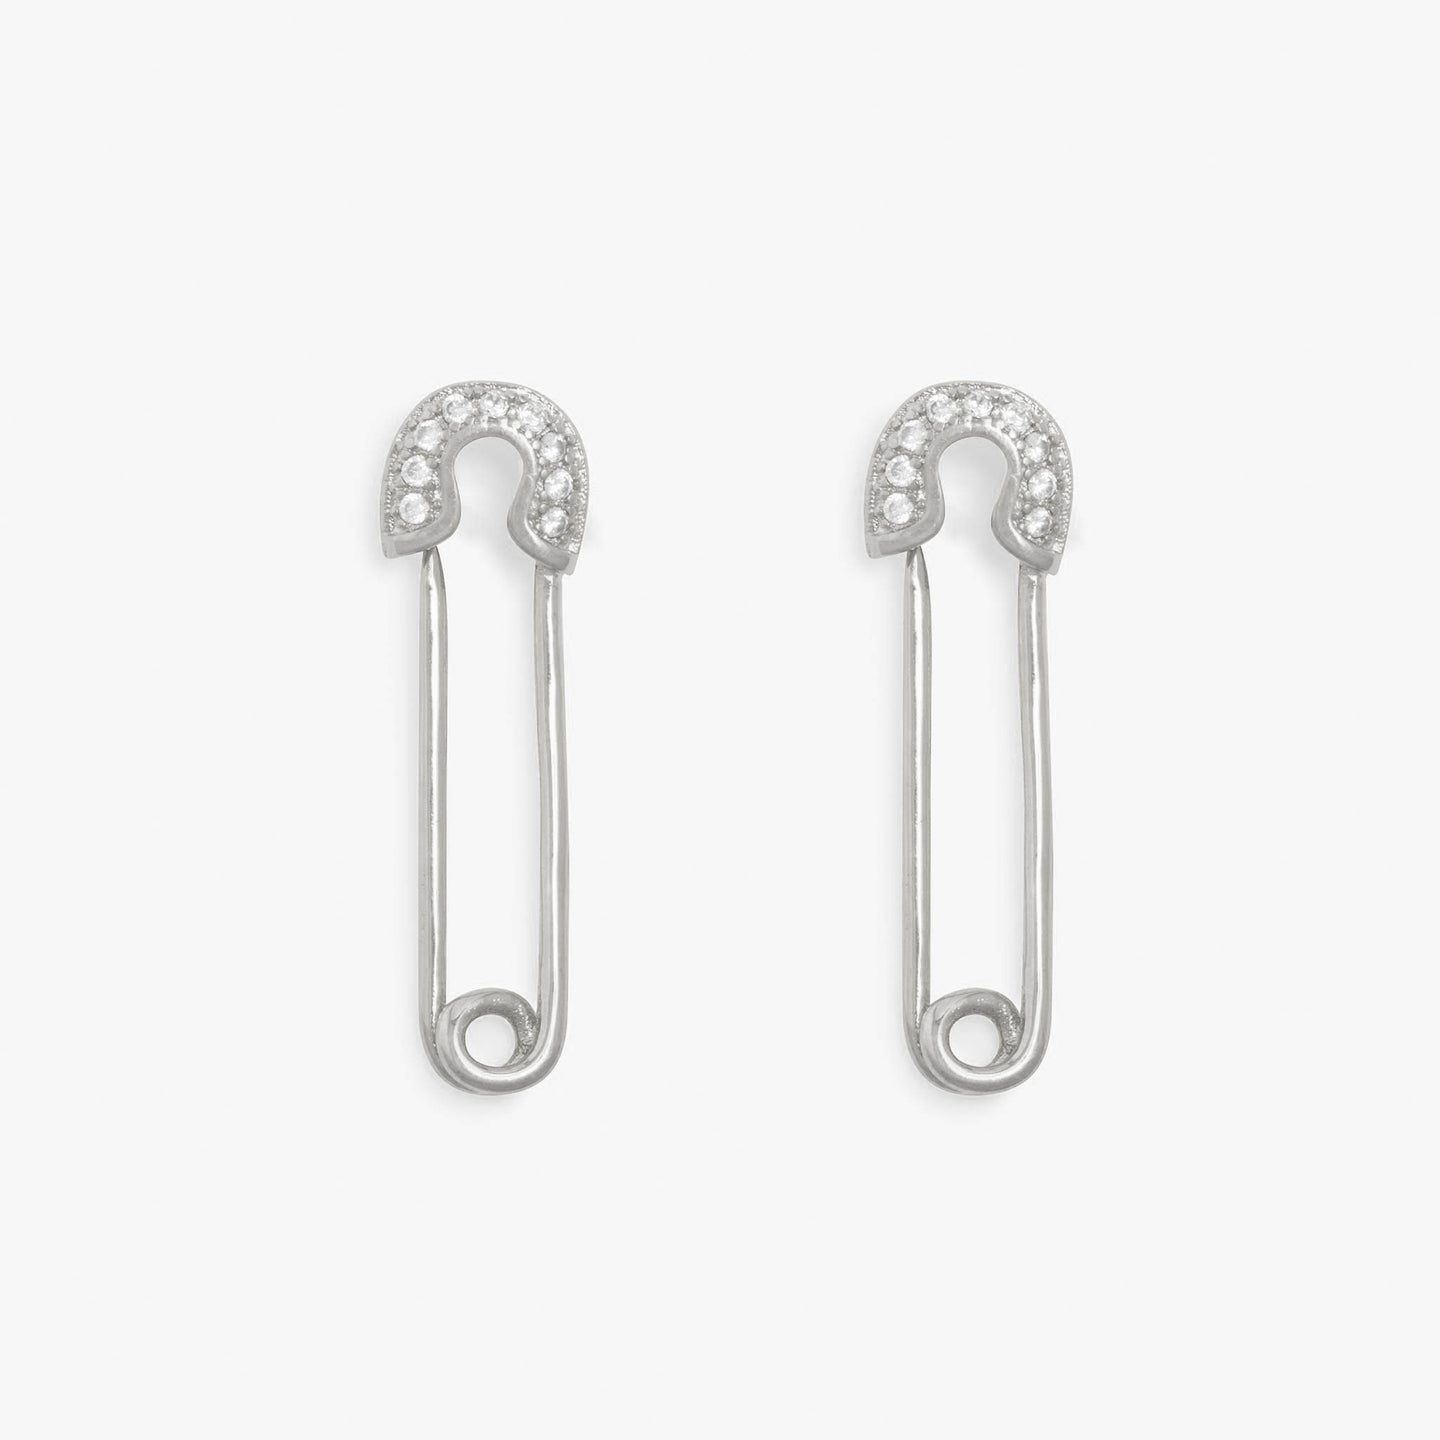 Small safety pin earring with CZ details. [pair] color:silver/clear